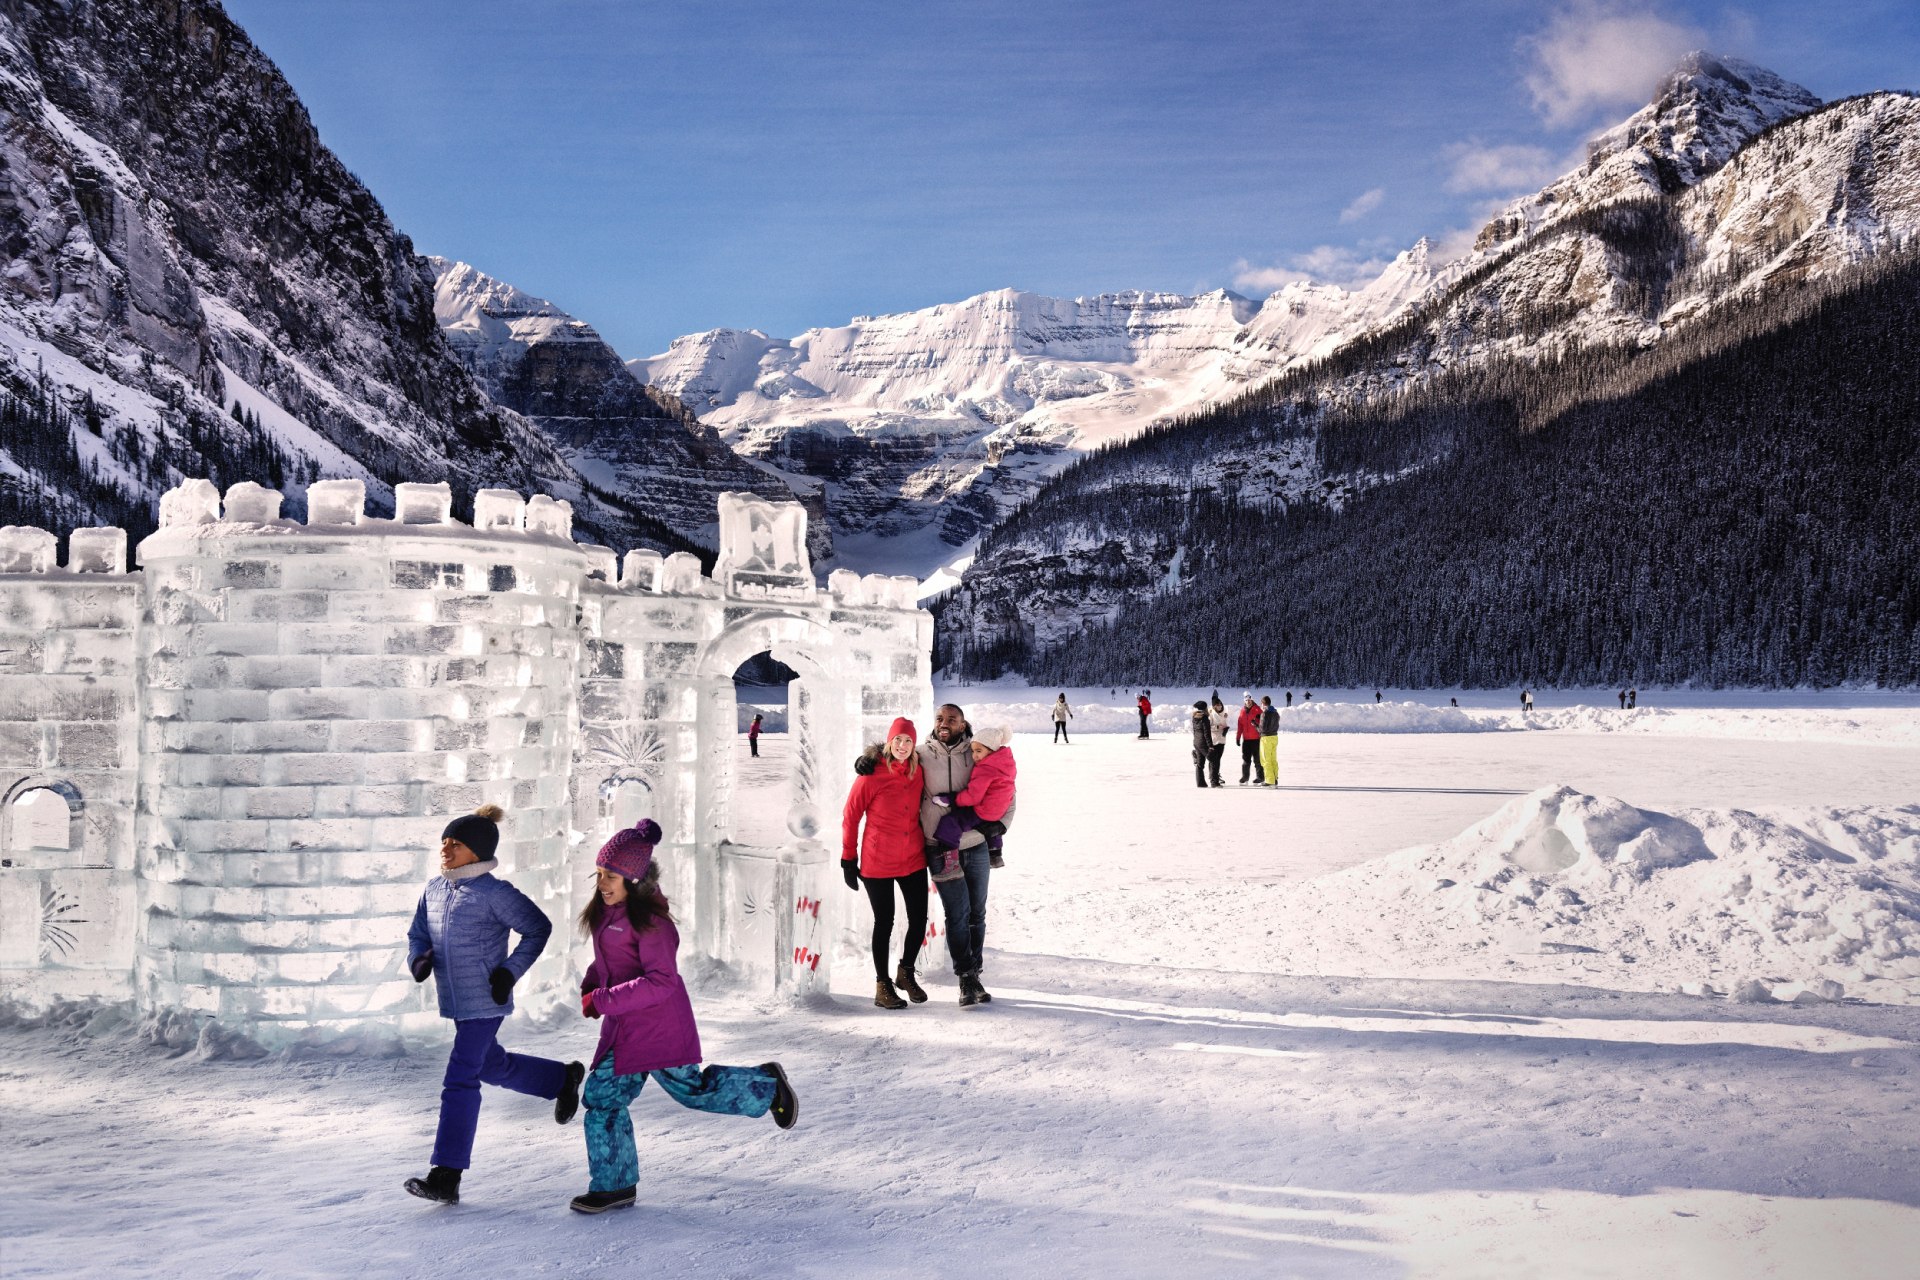 Why Banff Lake Louise is a Perfect Winter Wonderland